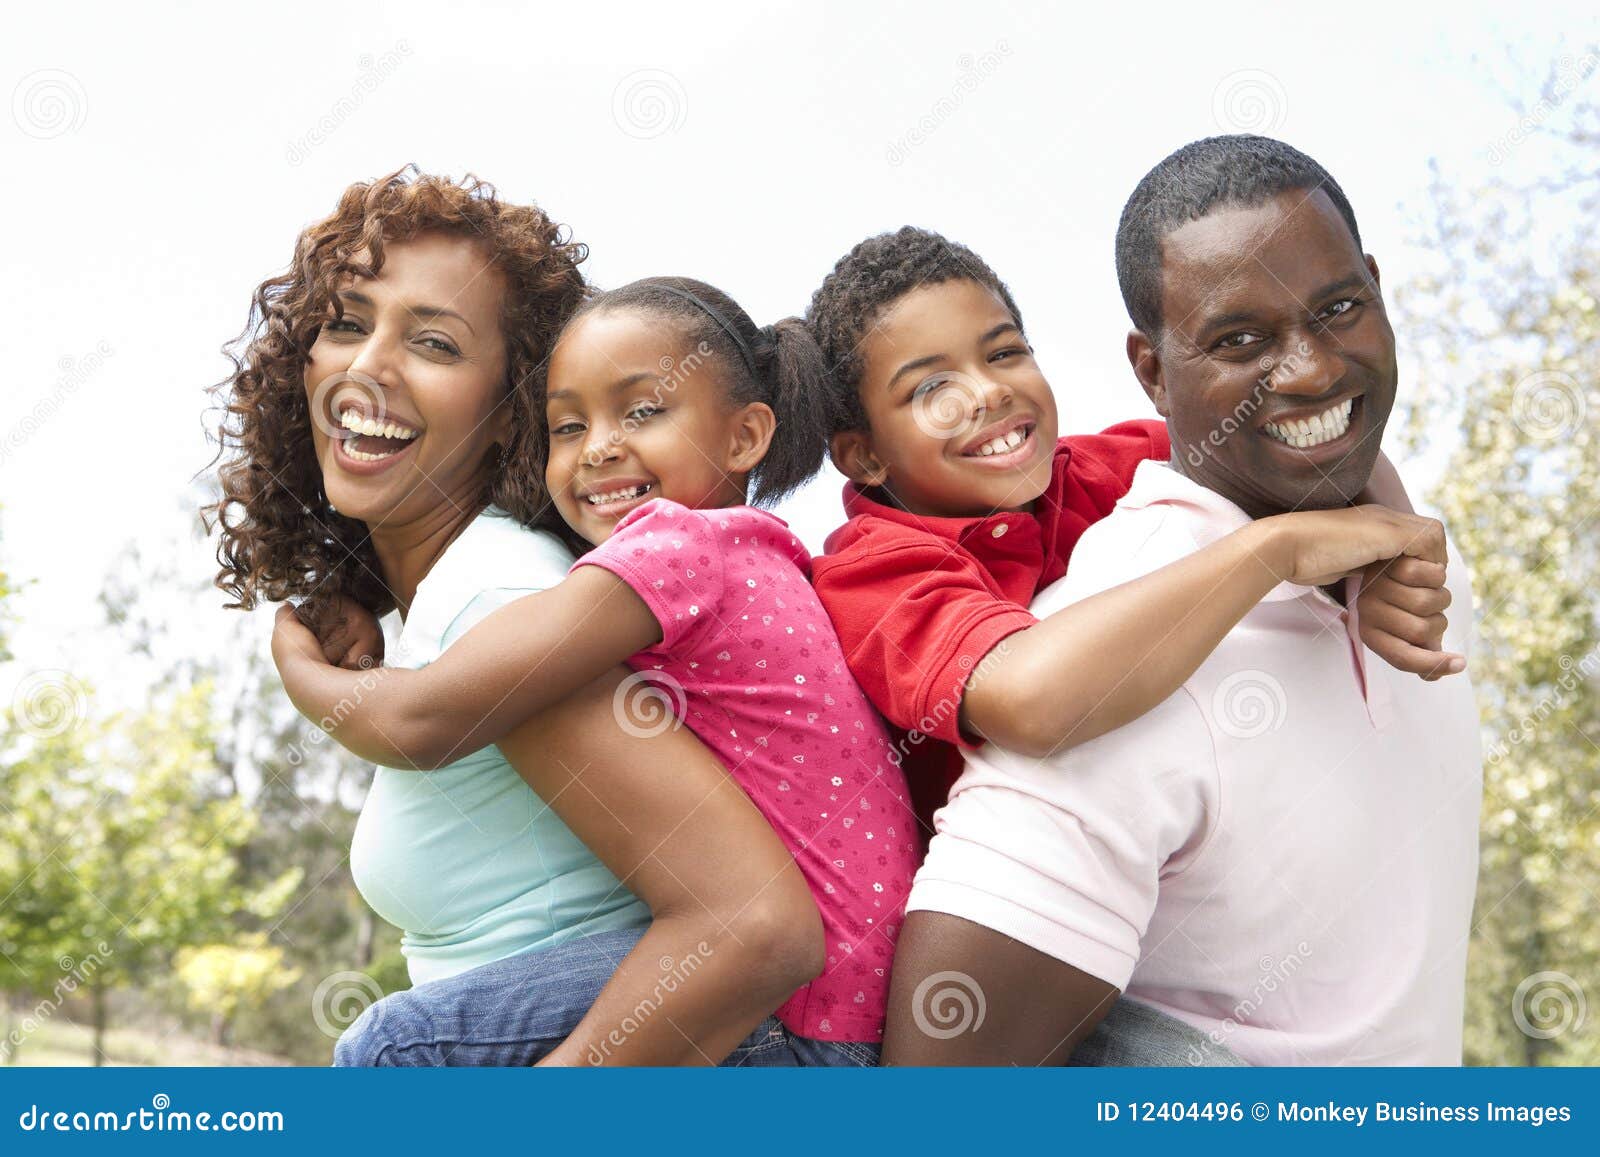 portrait of happy family in park